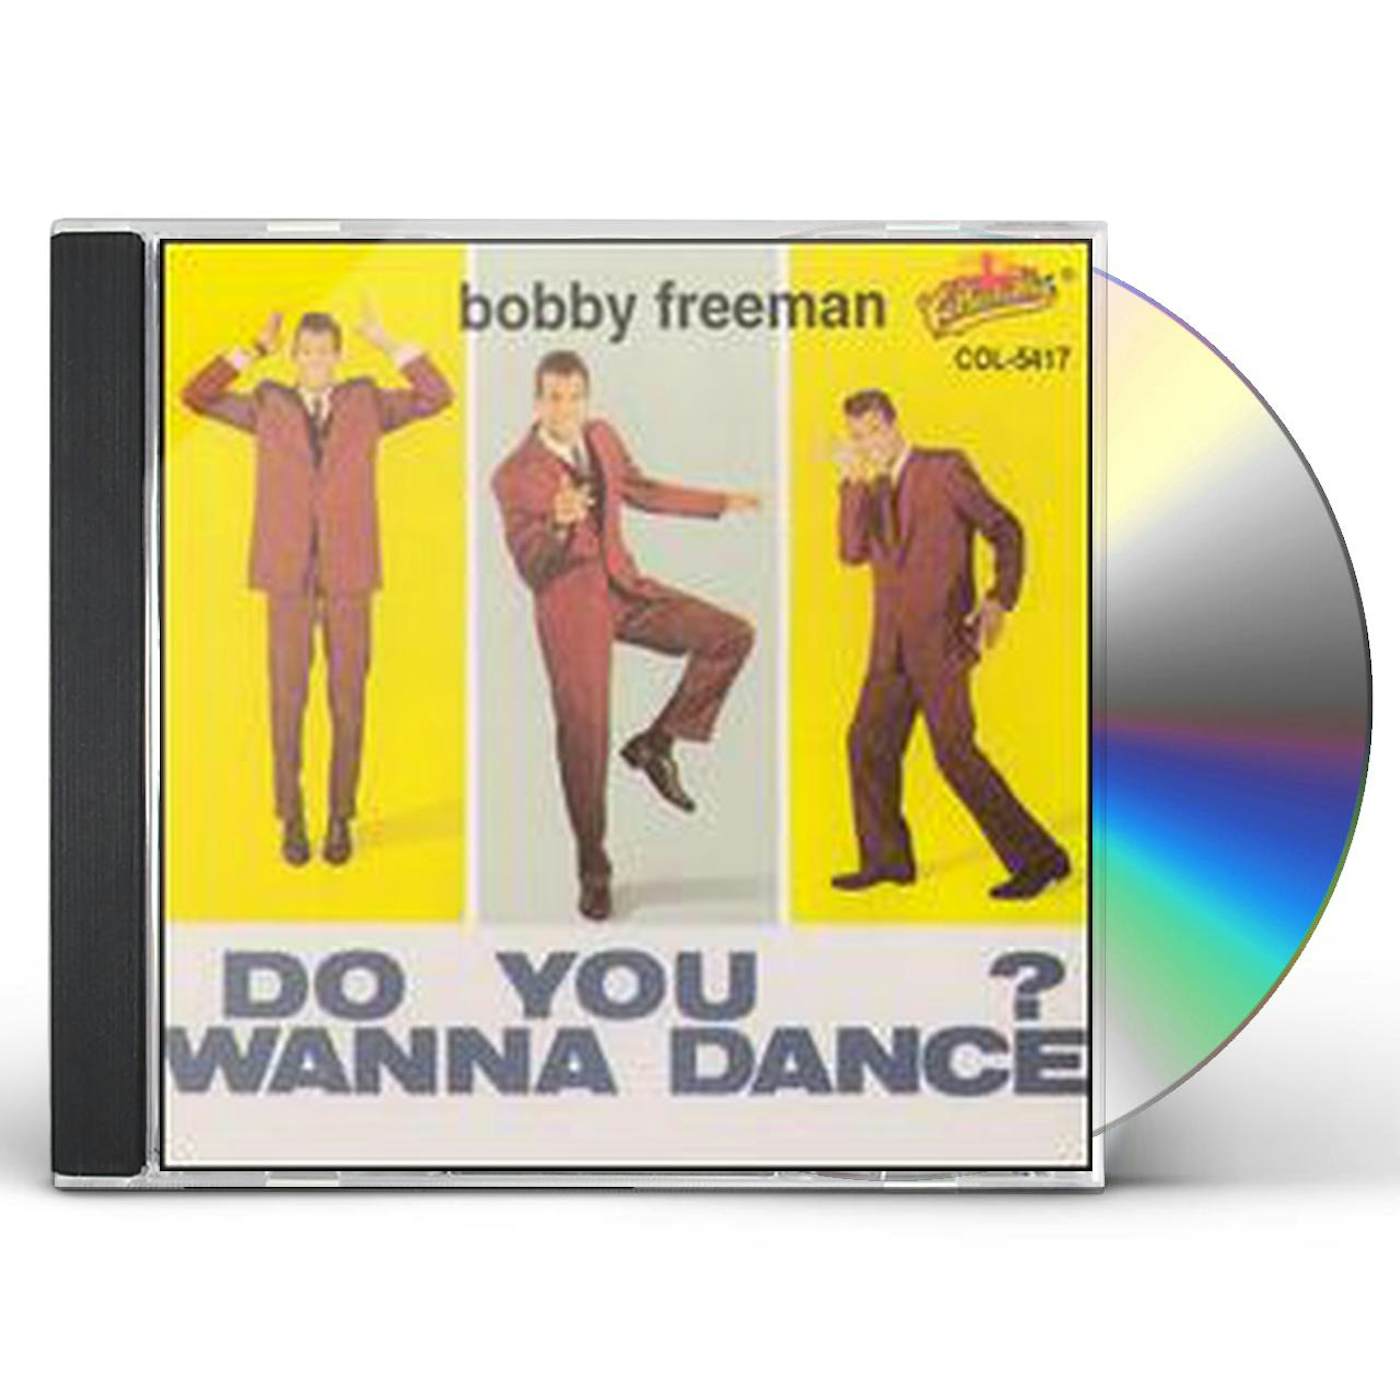 Bobby Freeman DO YOU WANT TO DANCE CD